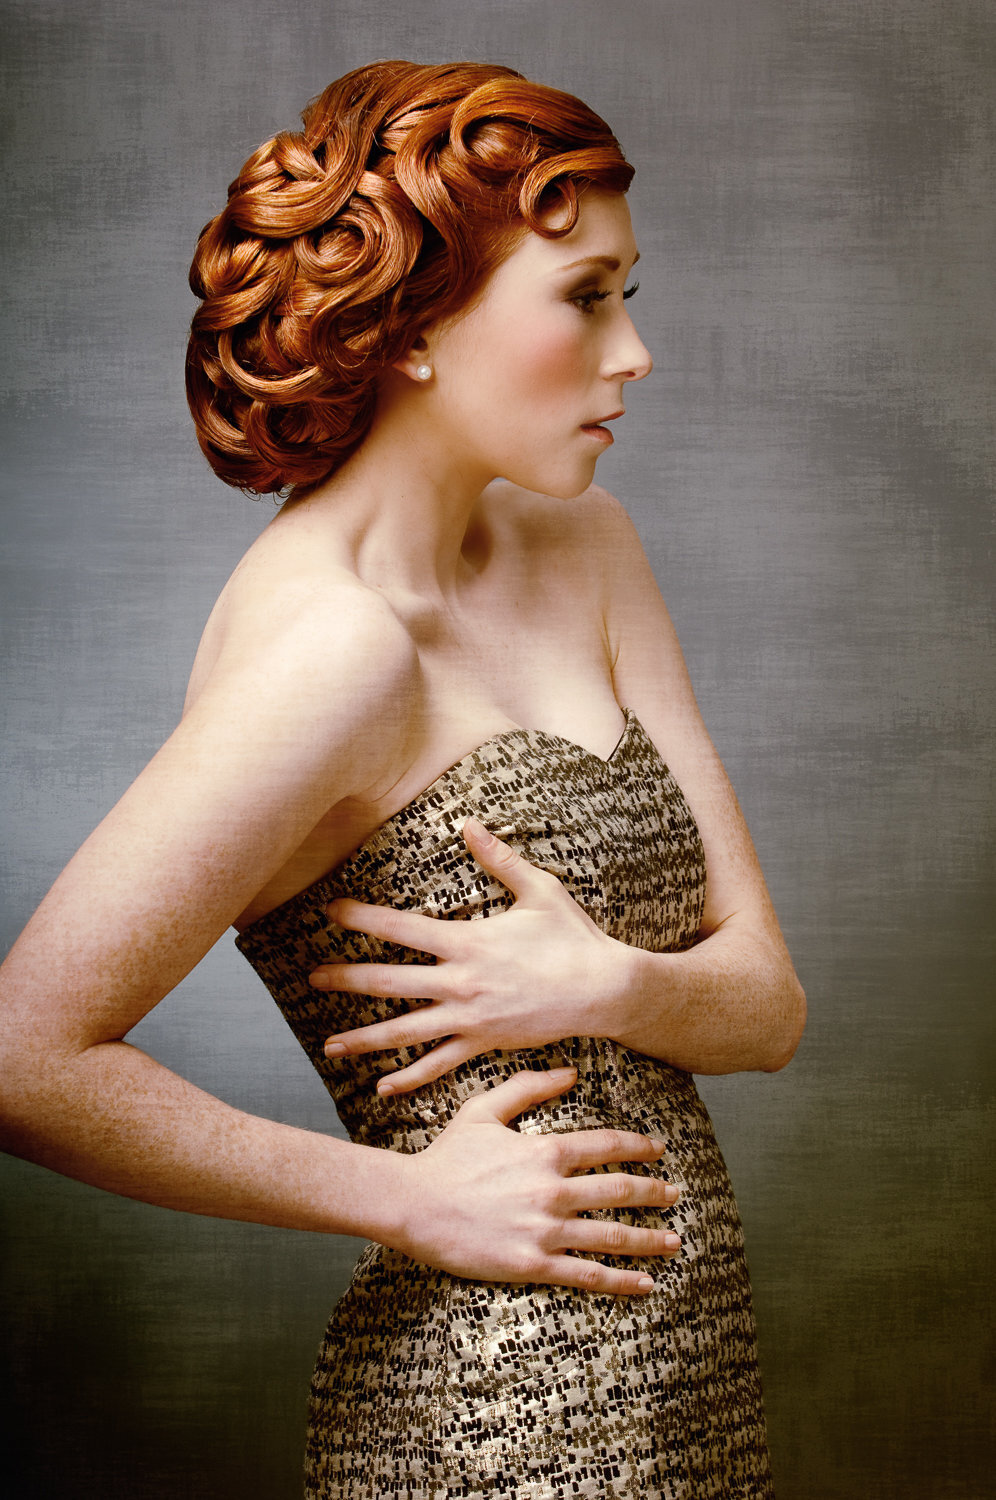 side profile of female model with red hair in vintage style wearing gold dress